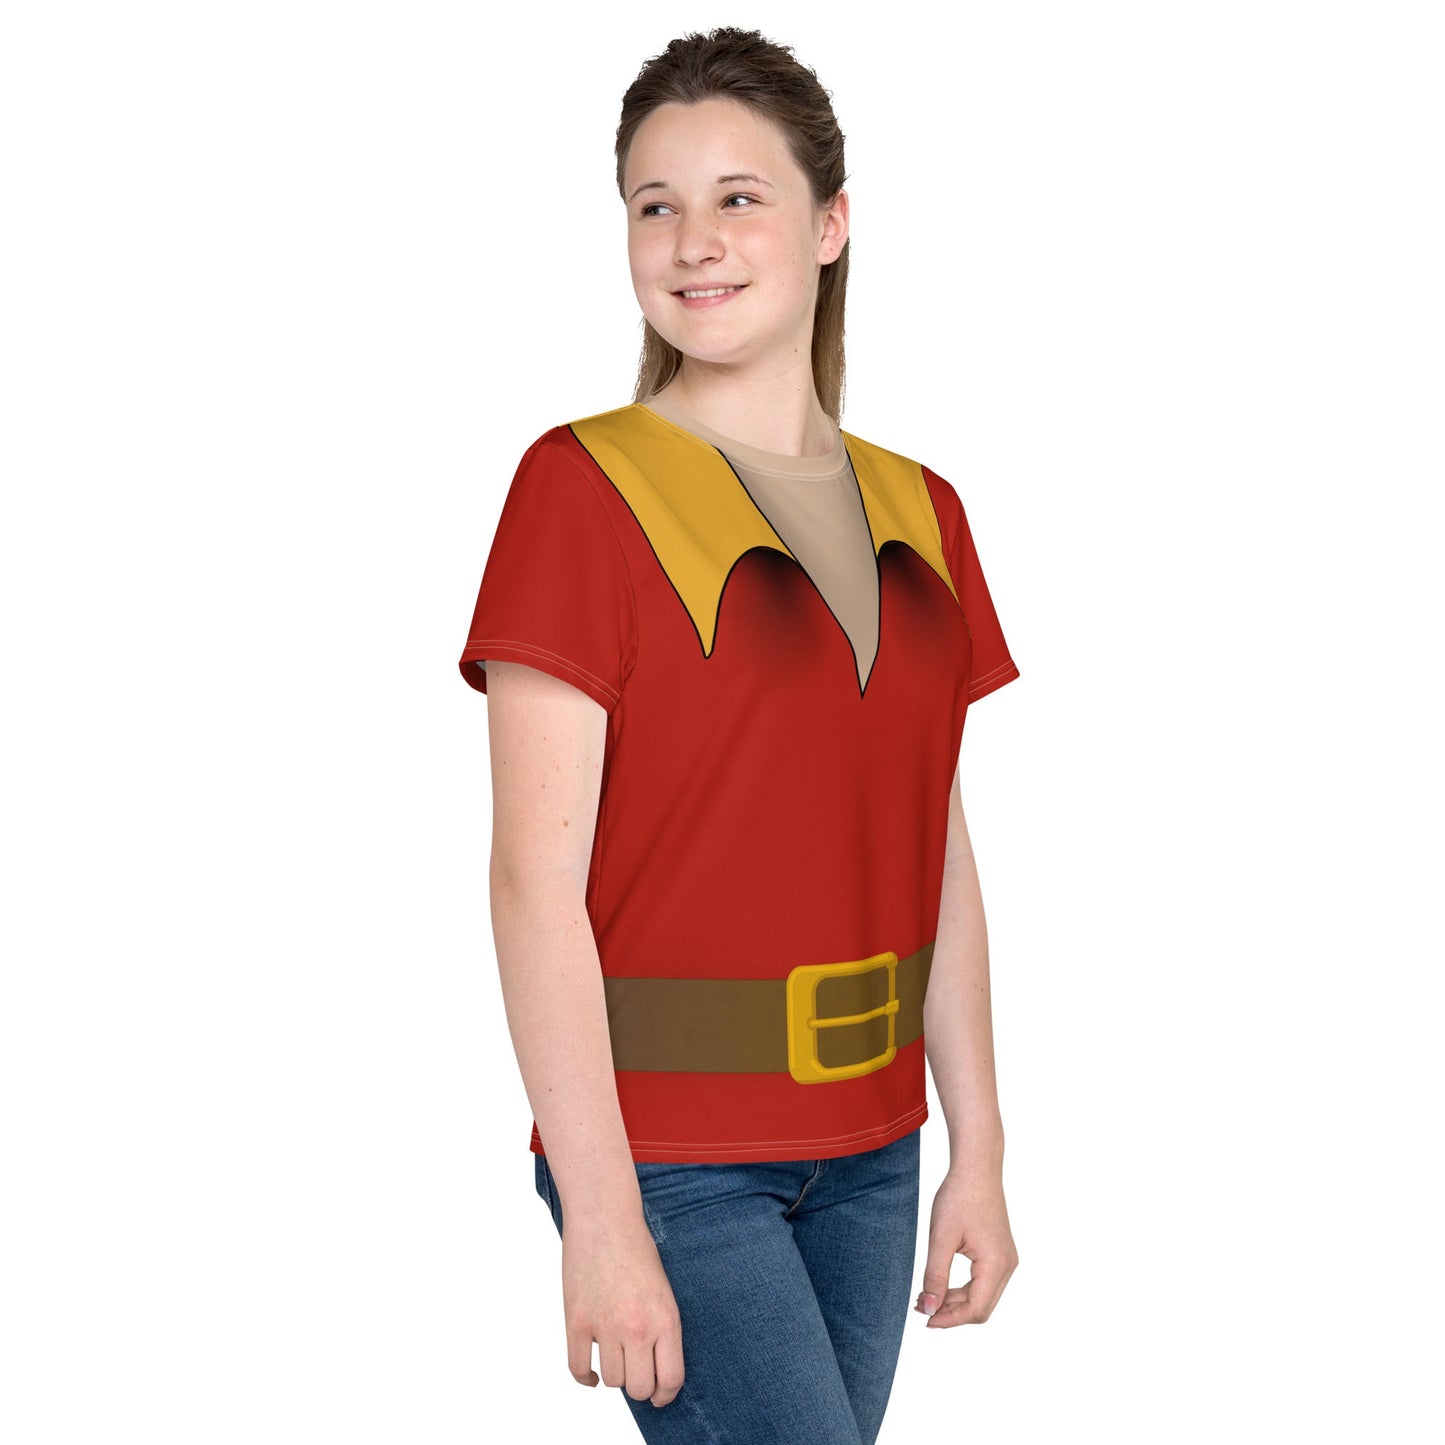 The Gaston Youth crew neck t-shirt beauty beastcosplayWrong Lever Clothing